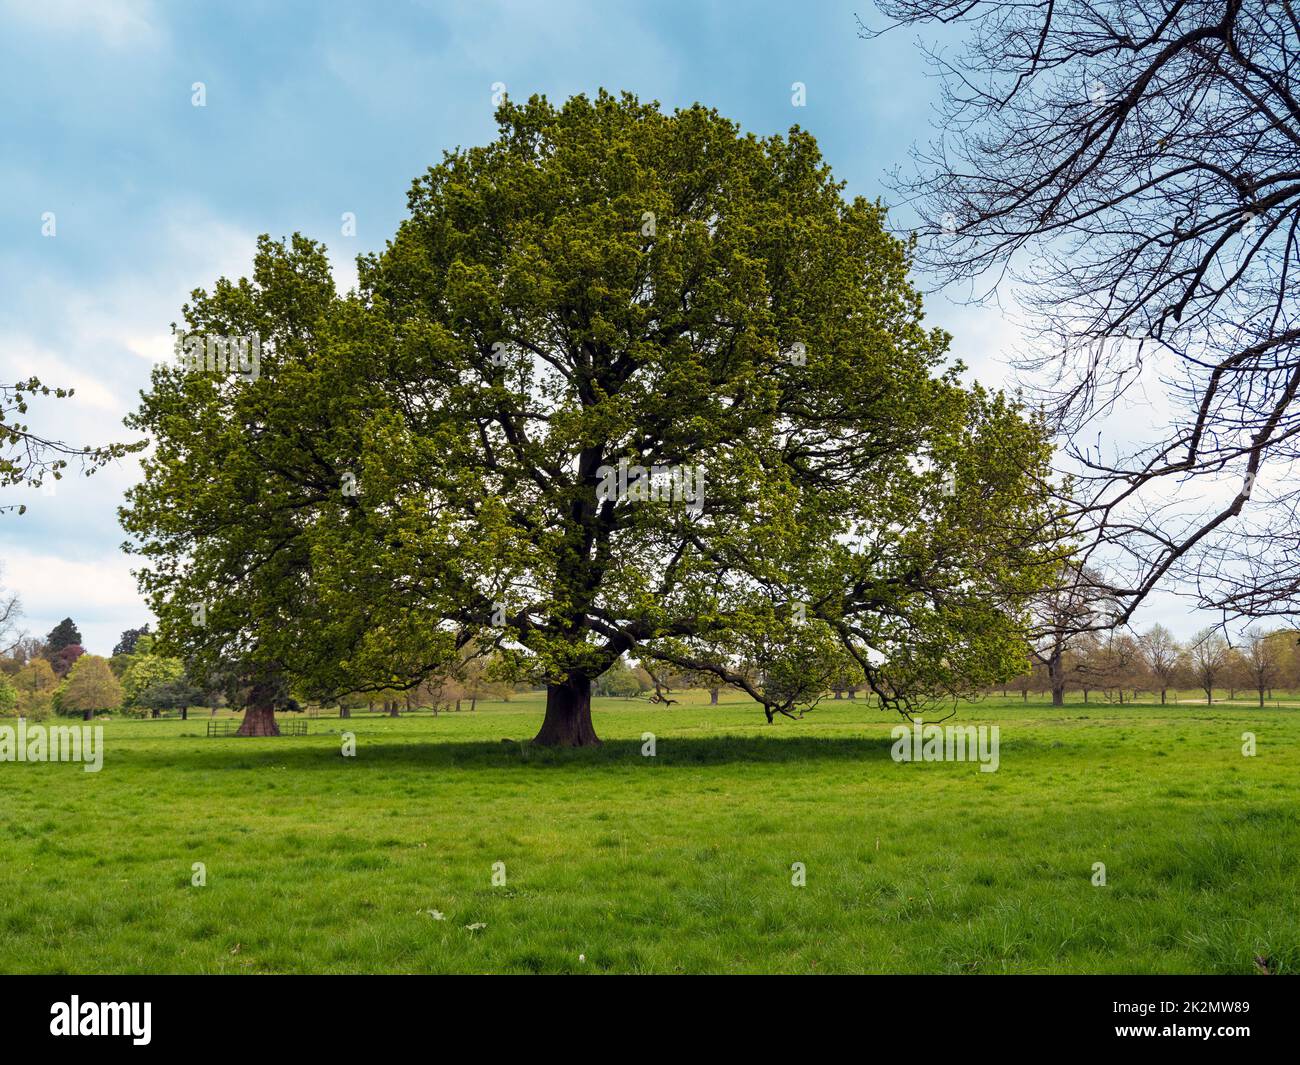 Oak tree in a park with fresh spring leaves Stock Photo